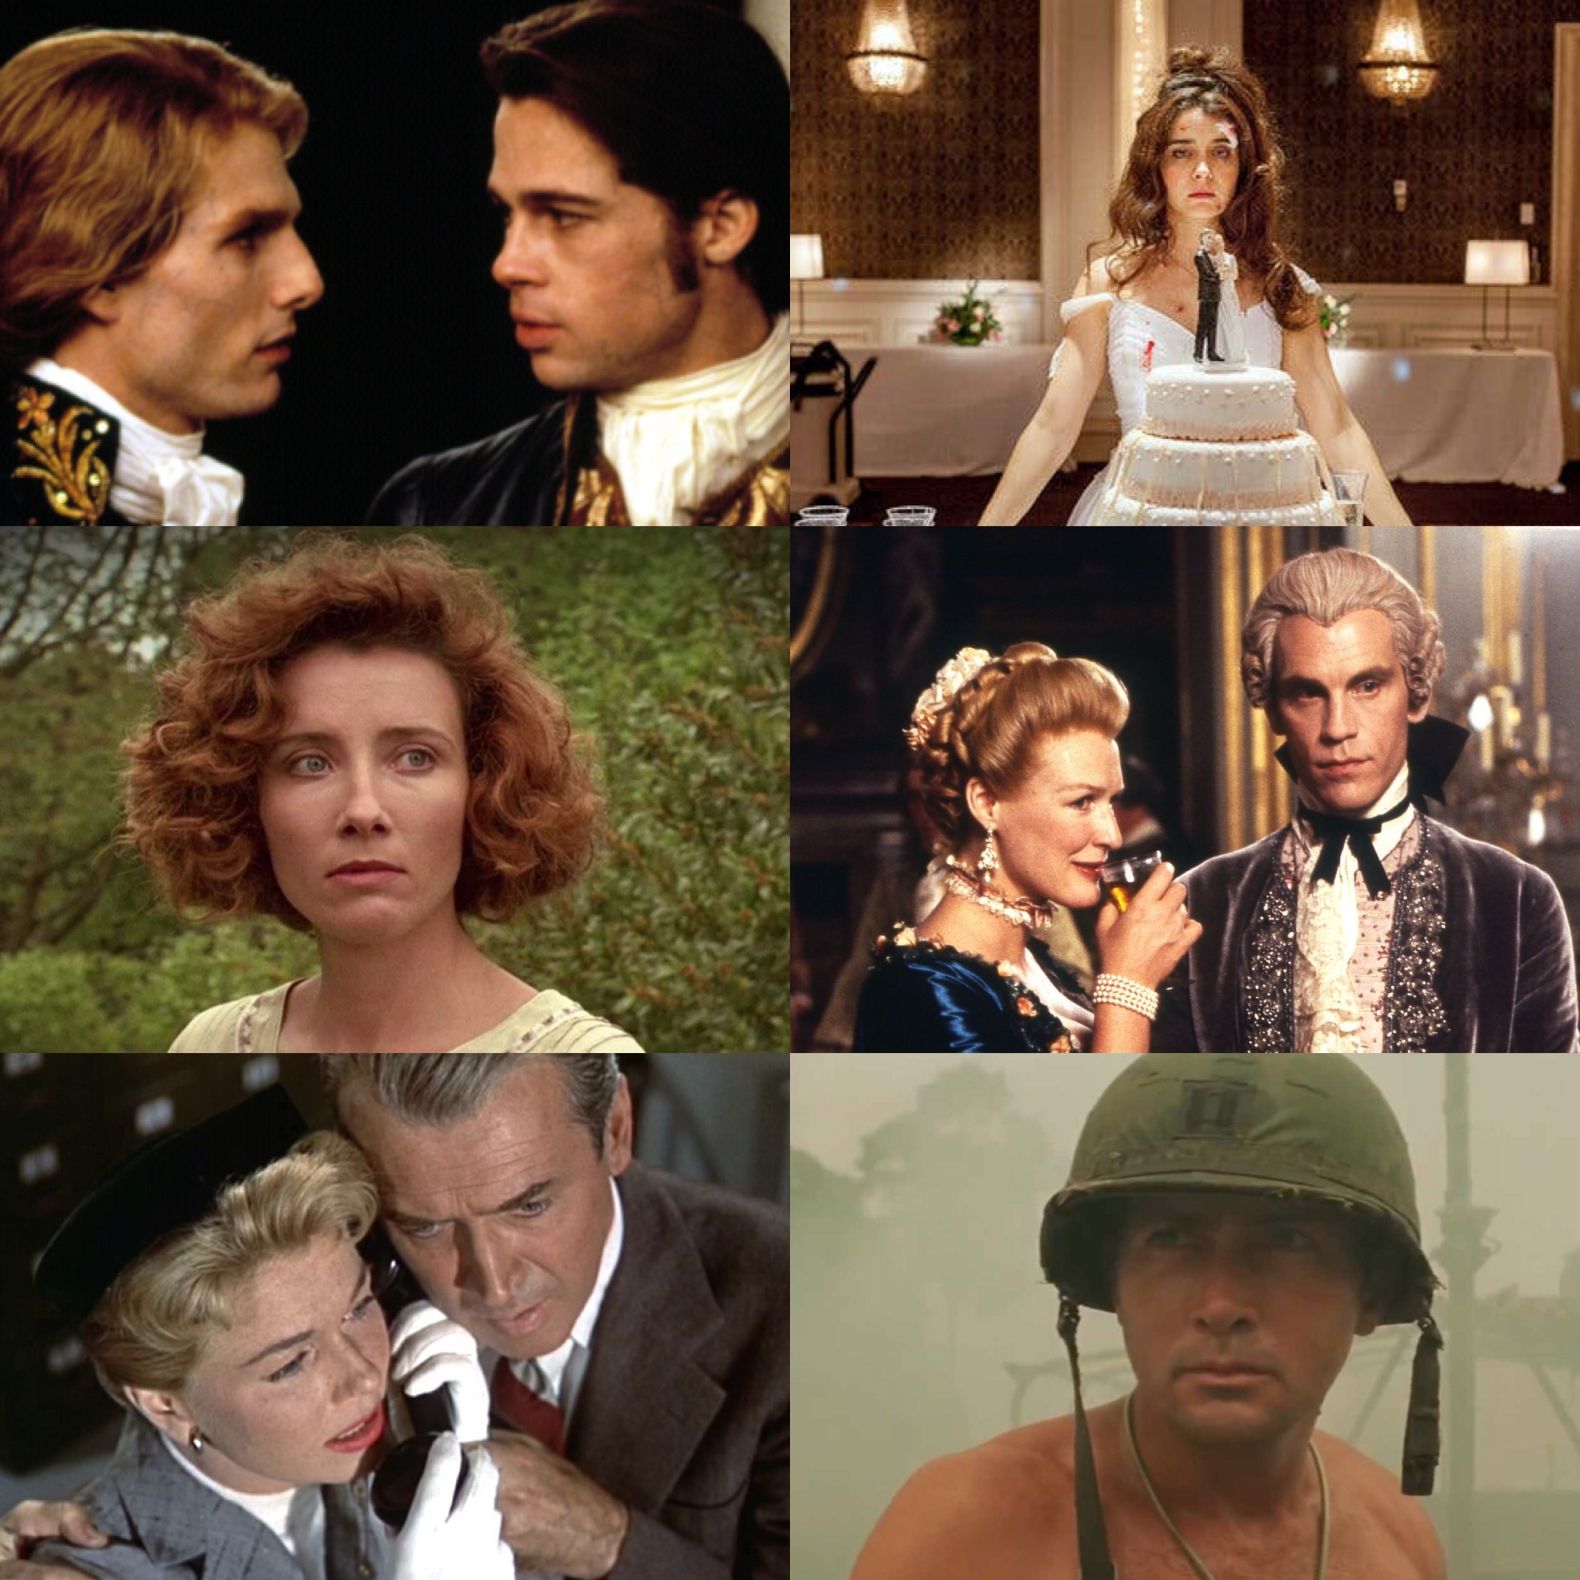 Duke Box #20: Our Guide to the Best Films on TV